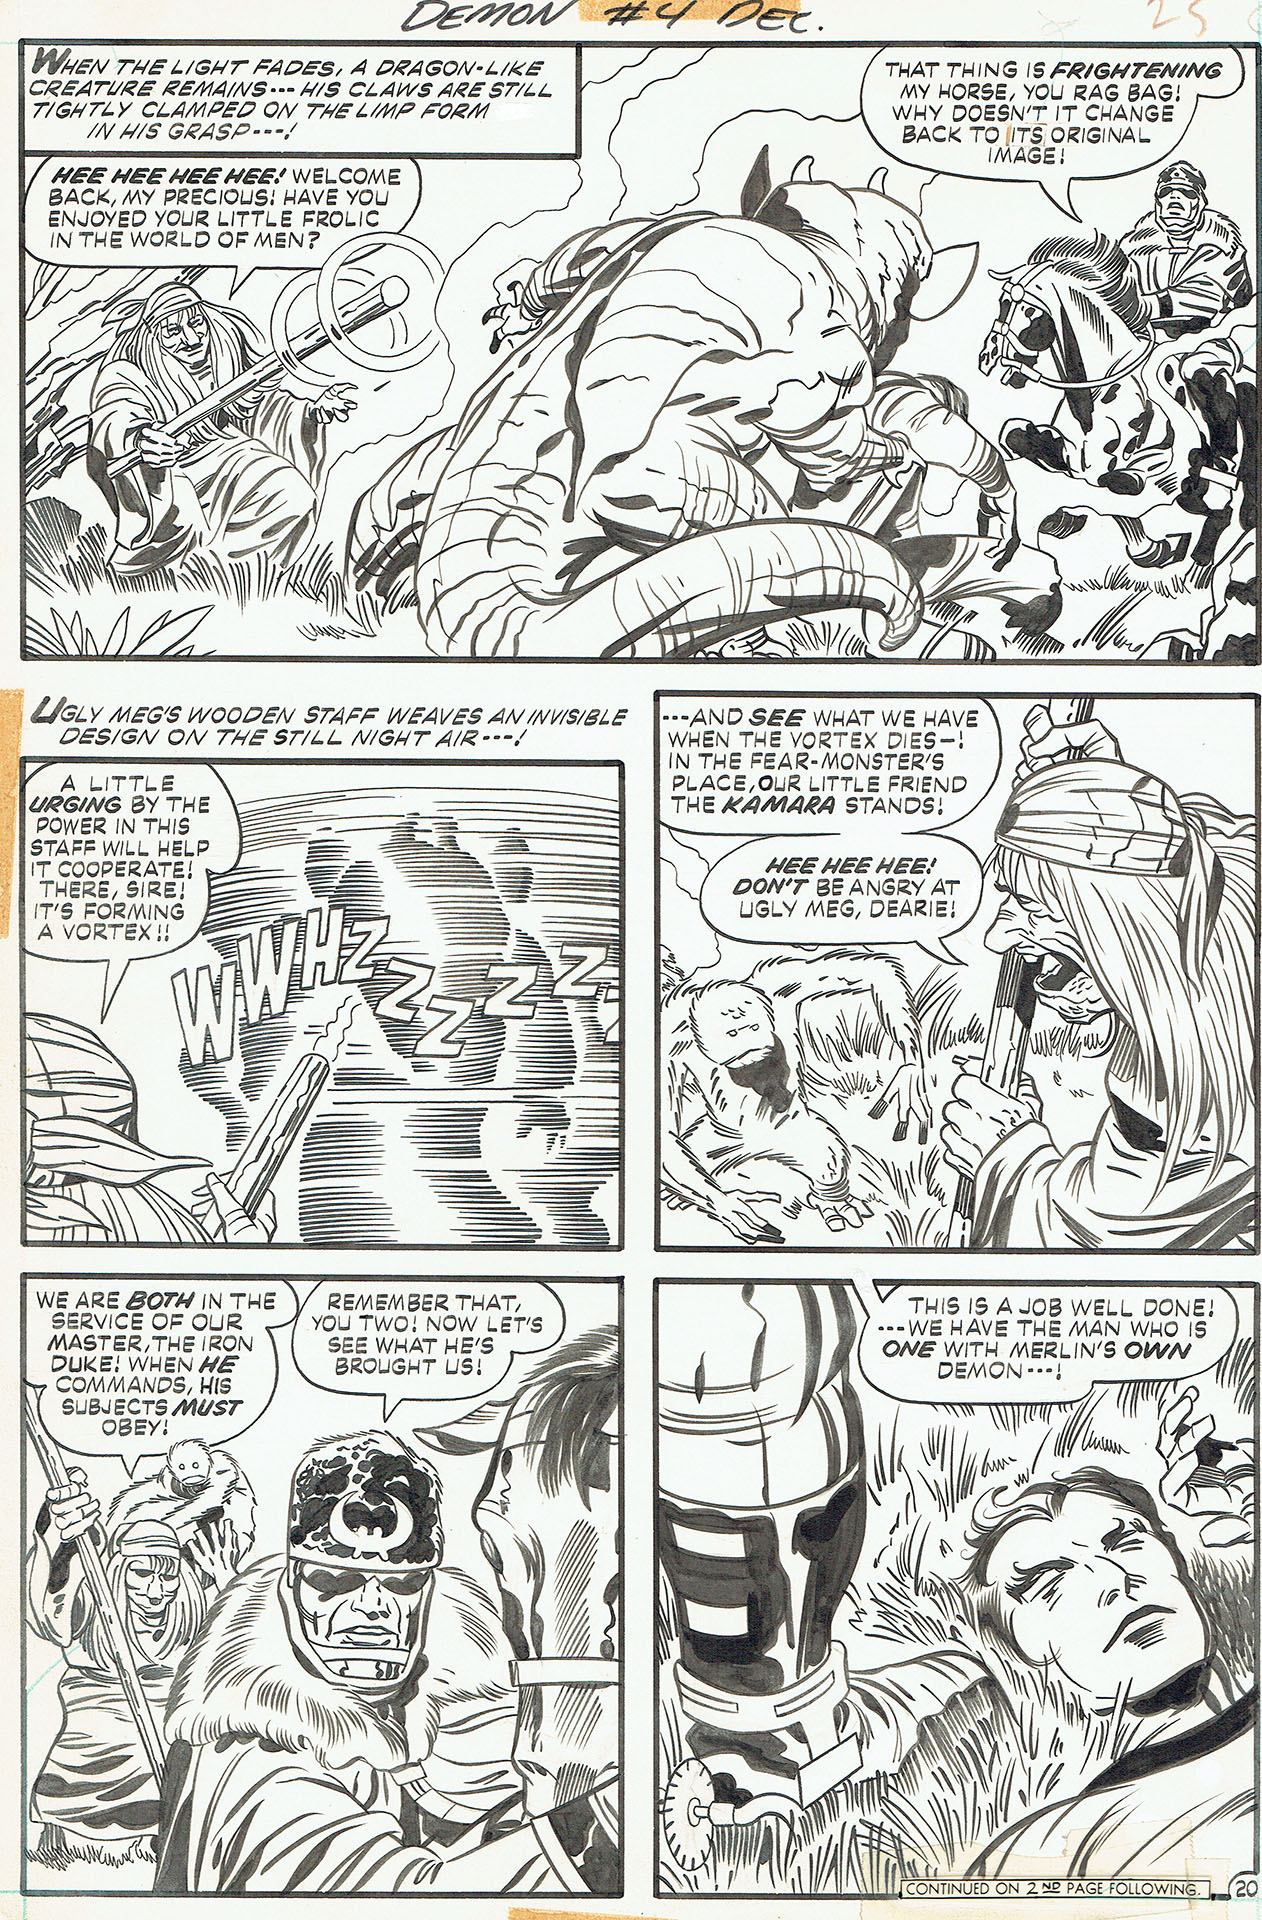 Jack KIRBY | The Demon — Issue 4 — Page 20